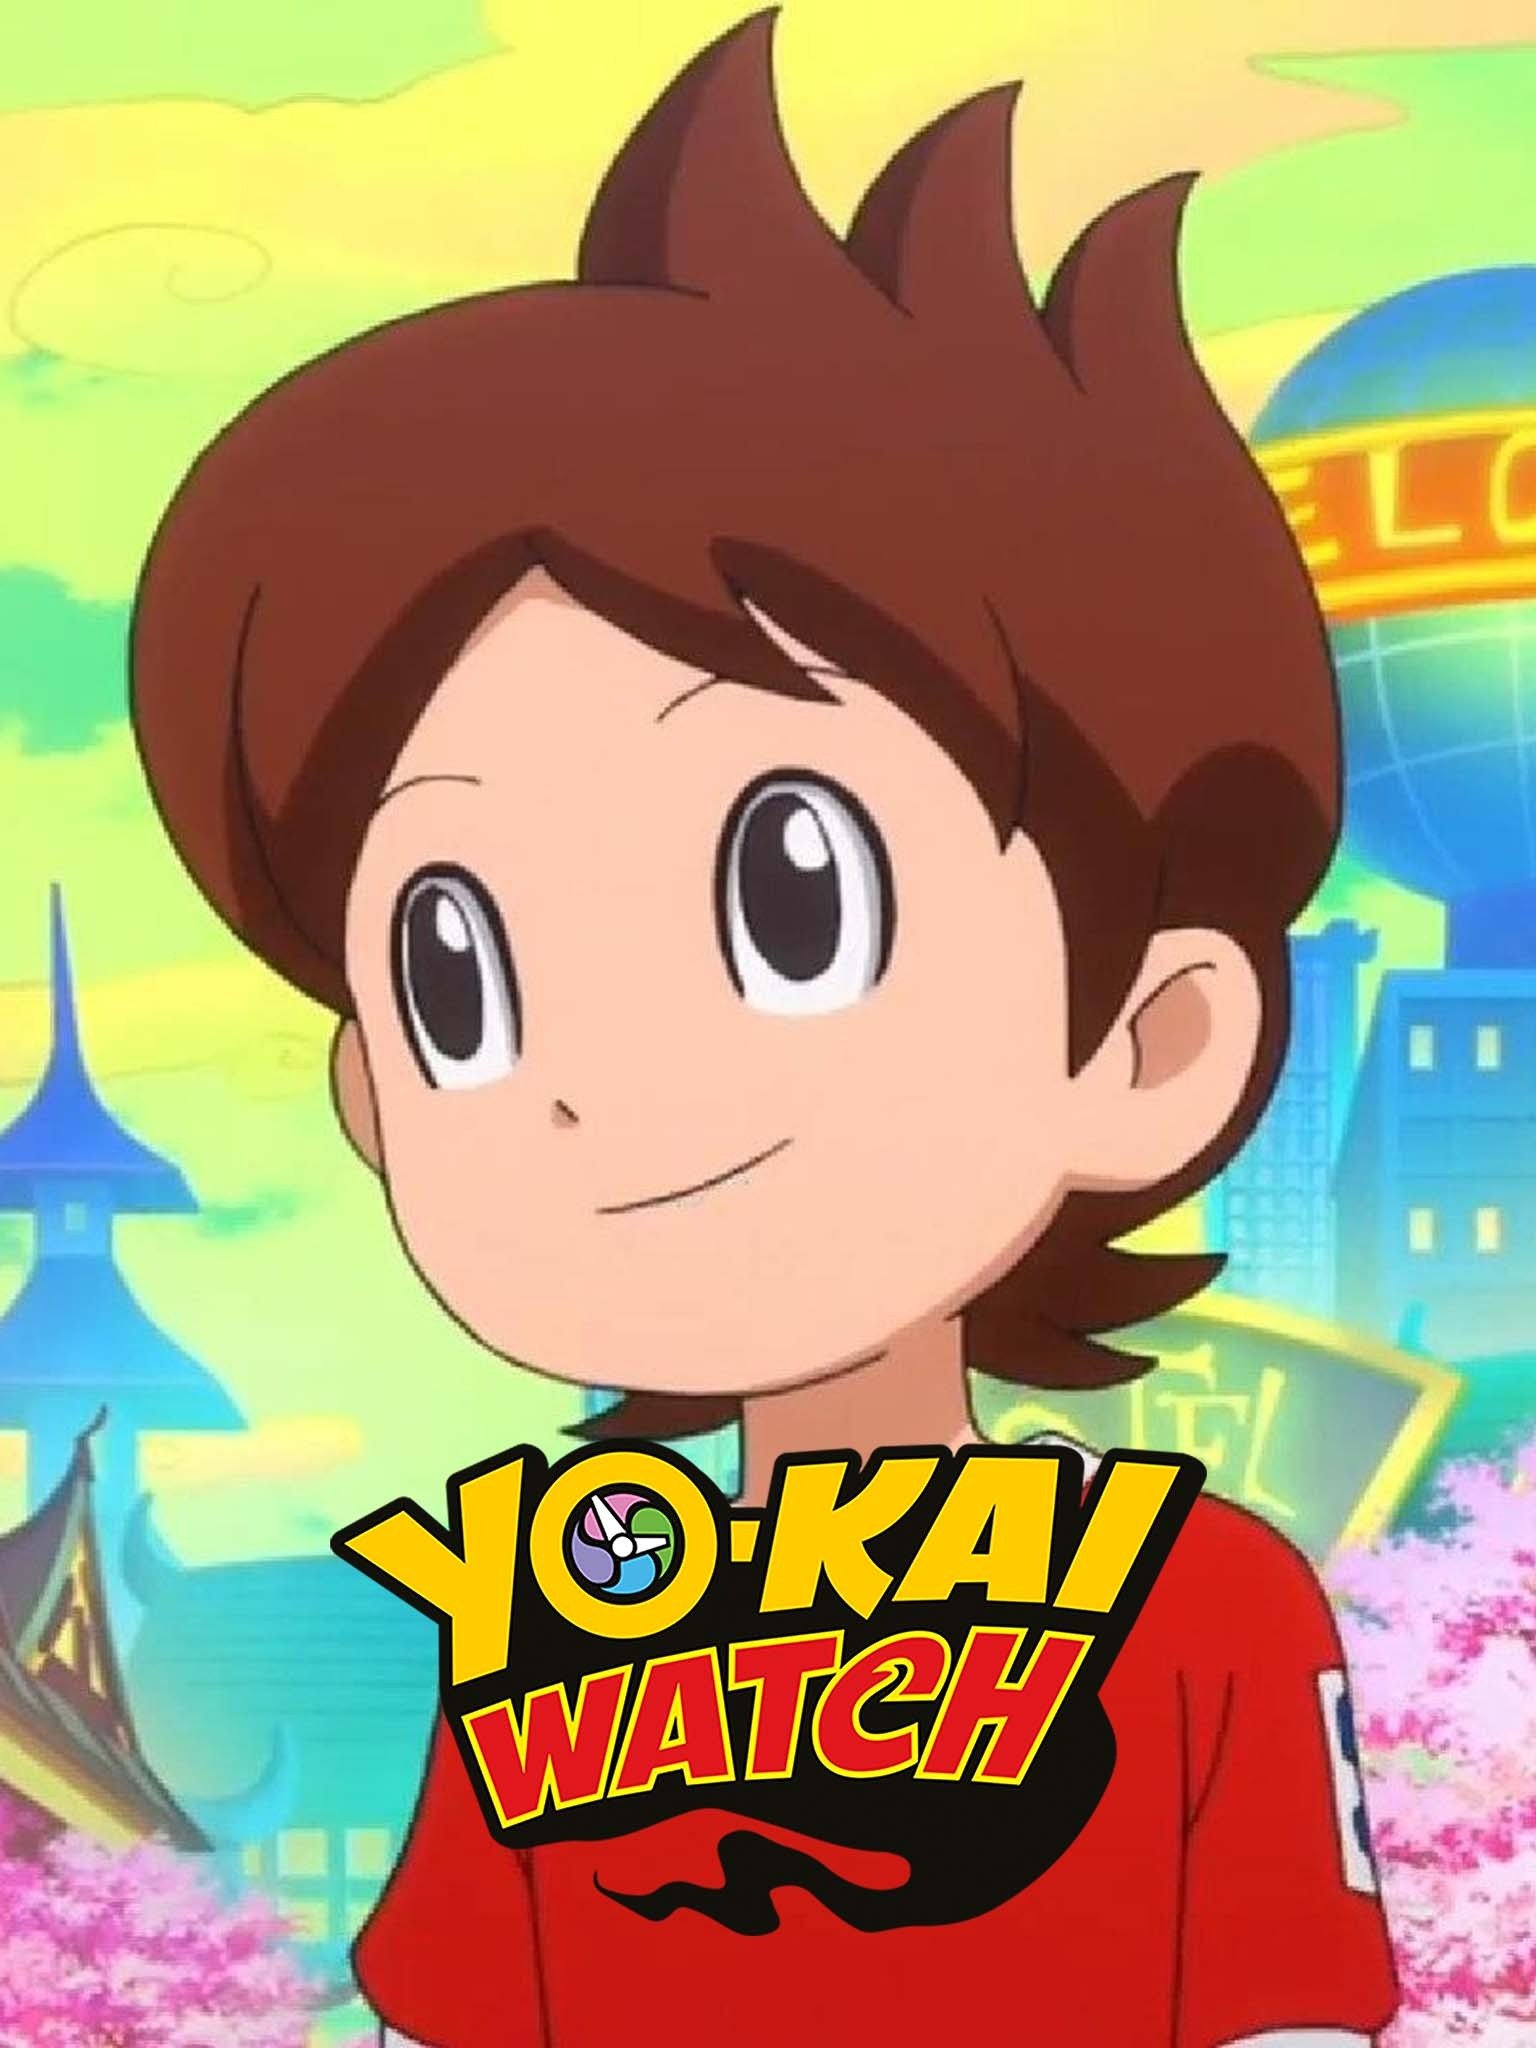 YoKai Watch Dev Level5 Teases What Could Be Coming Next for the Series